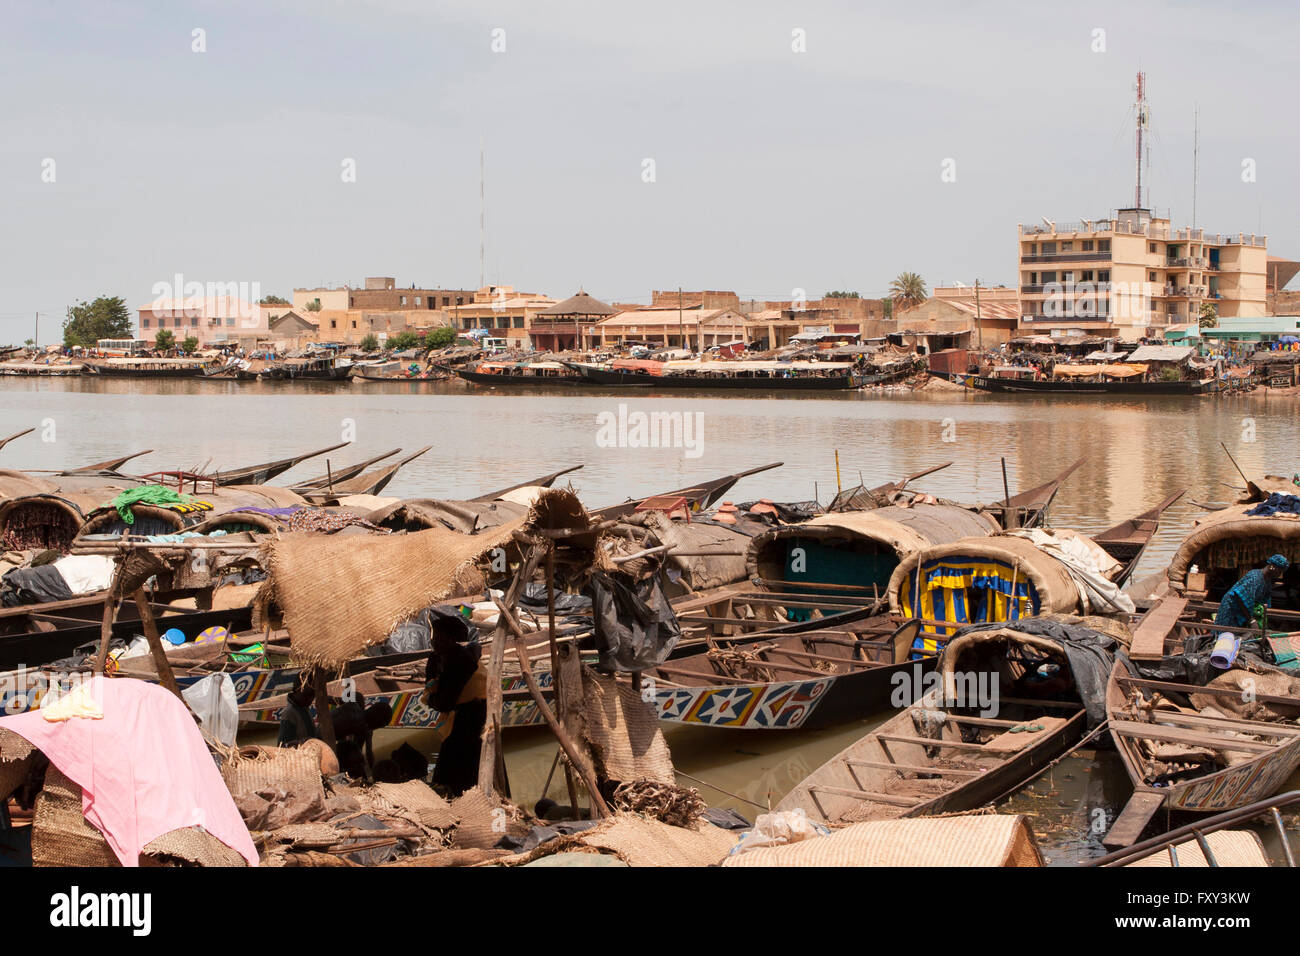 Pirogues docked in Mopti river port Stock Photo